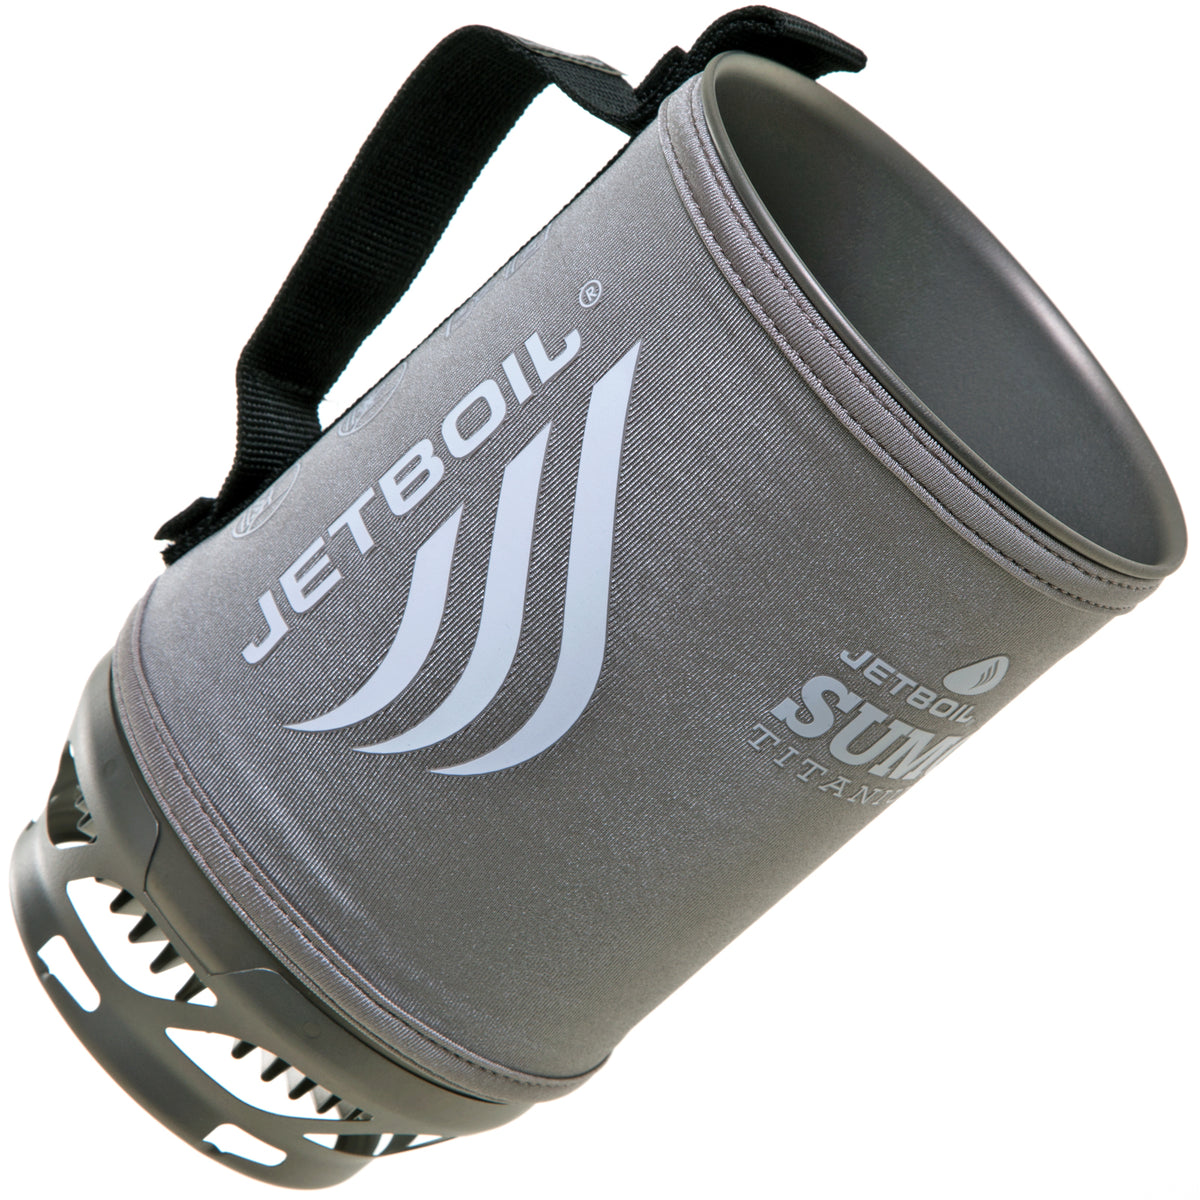 Buy jetboil titanium cup - Online store for camping, camp dishes & utensils in USA, on sale, low price, discount deals, coupon code